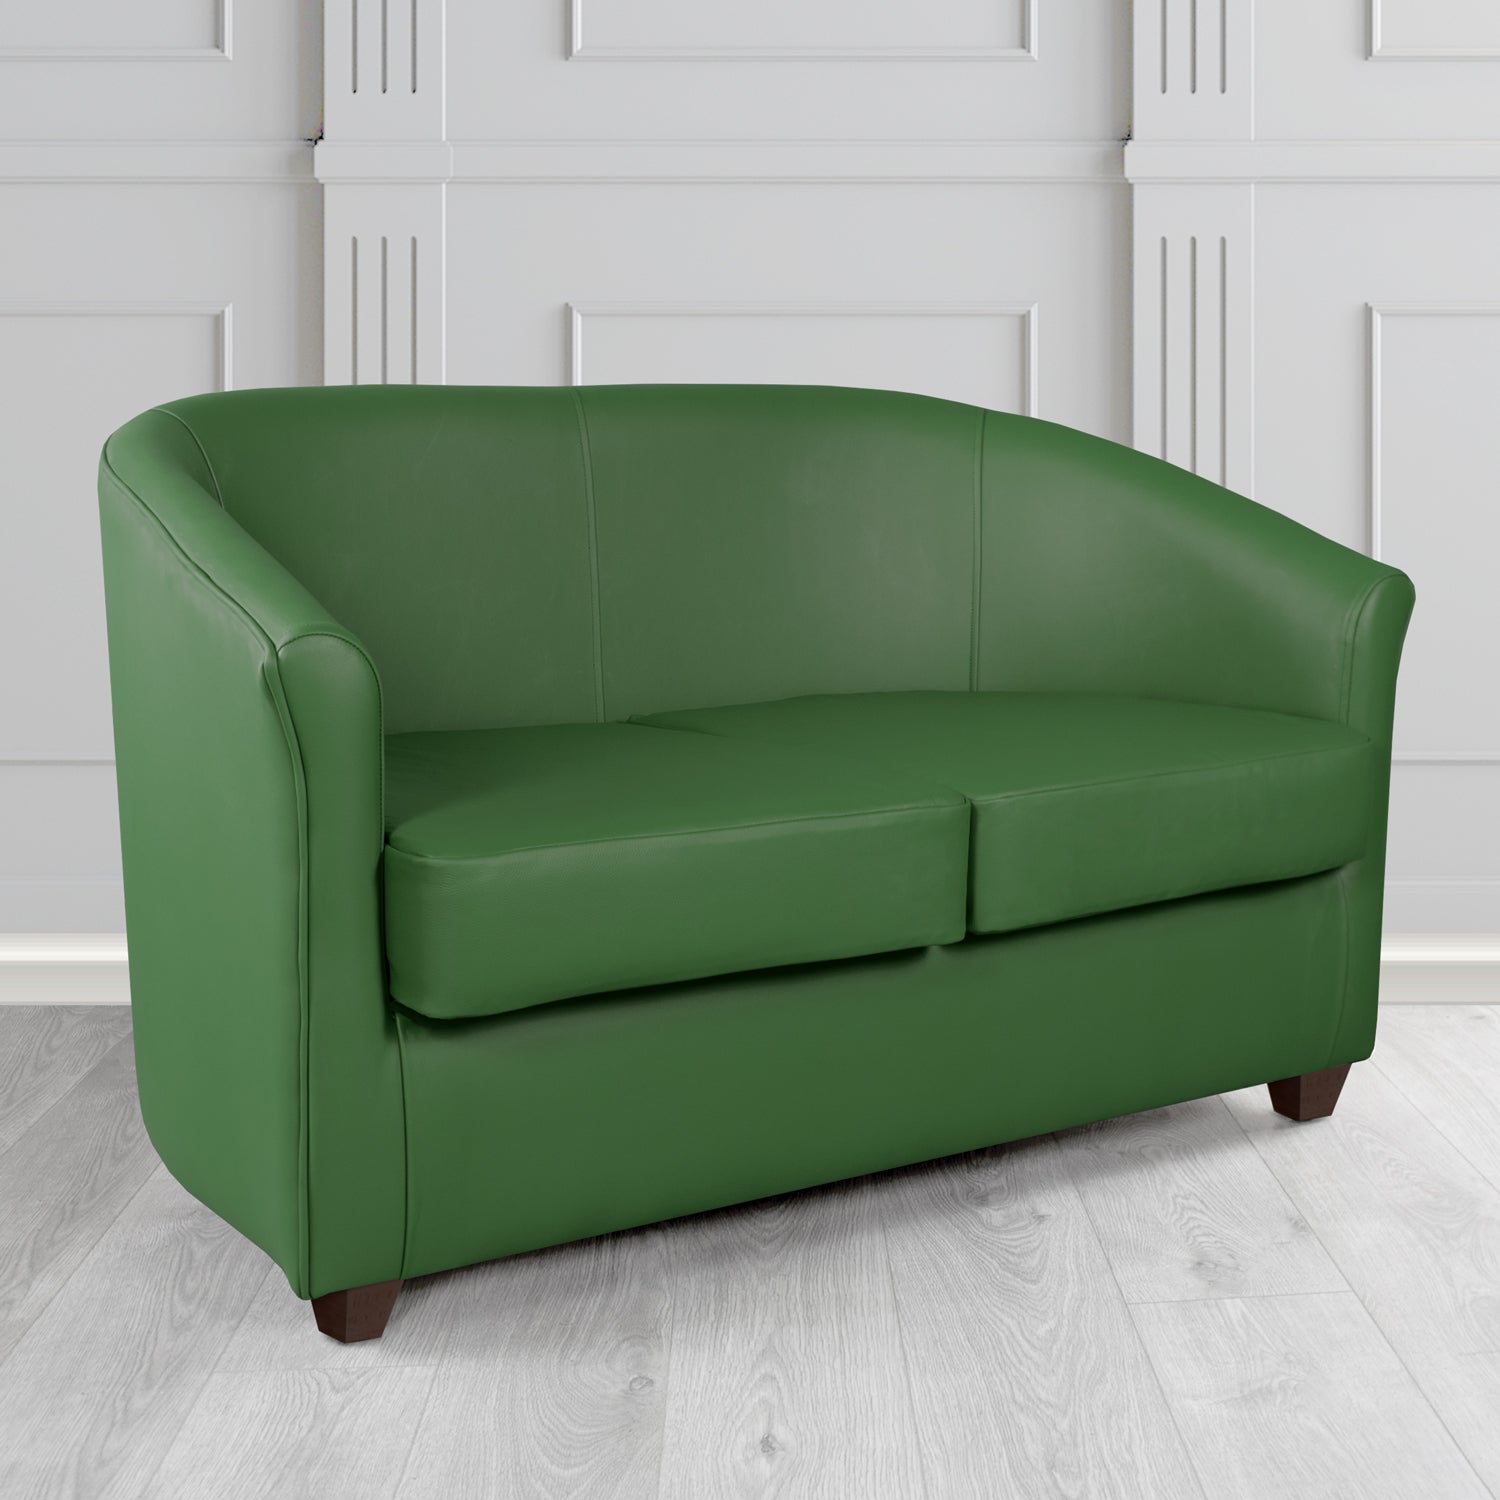 Cannes 2 Seater Tub Sofa in Just Colour Rainforest Crib 5 Faux Leather - The Tub Chair Shop